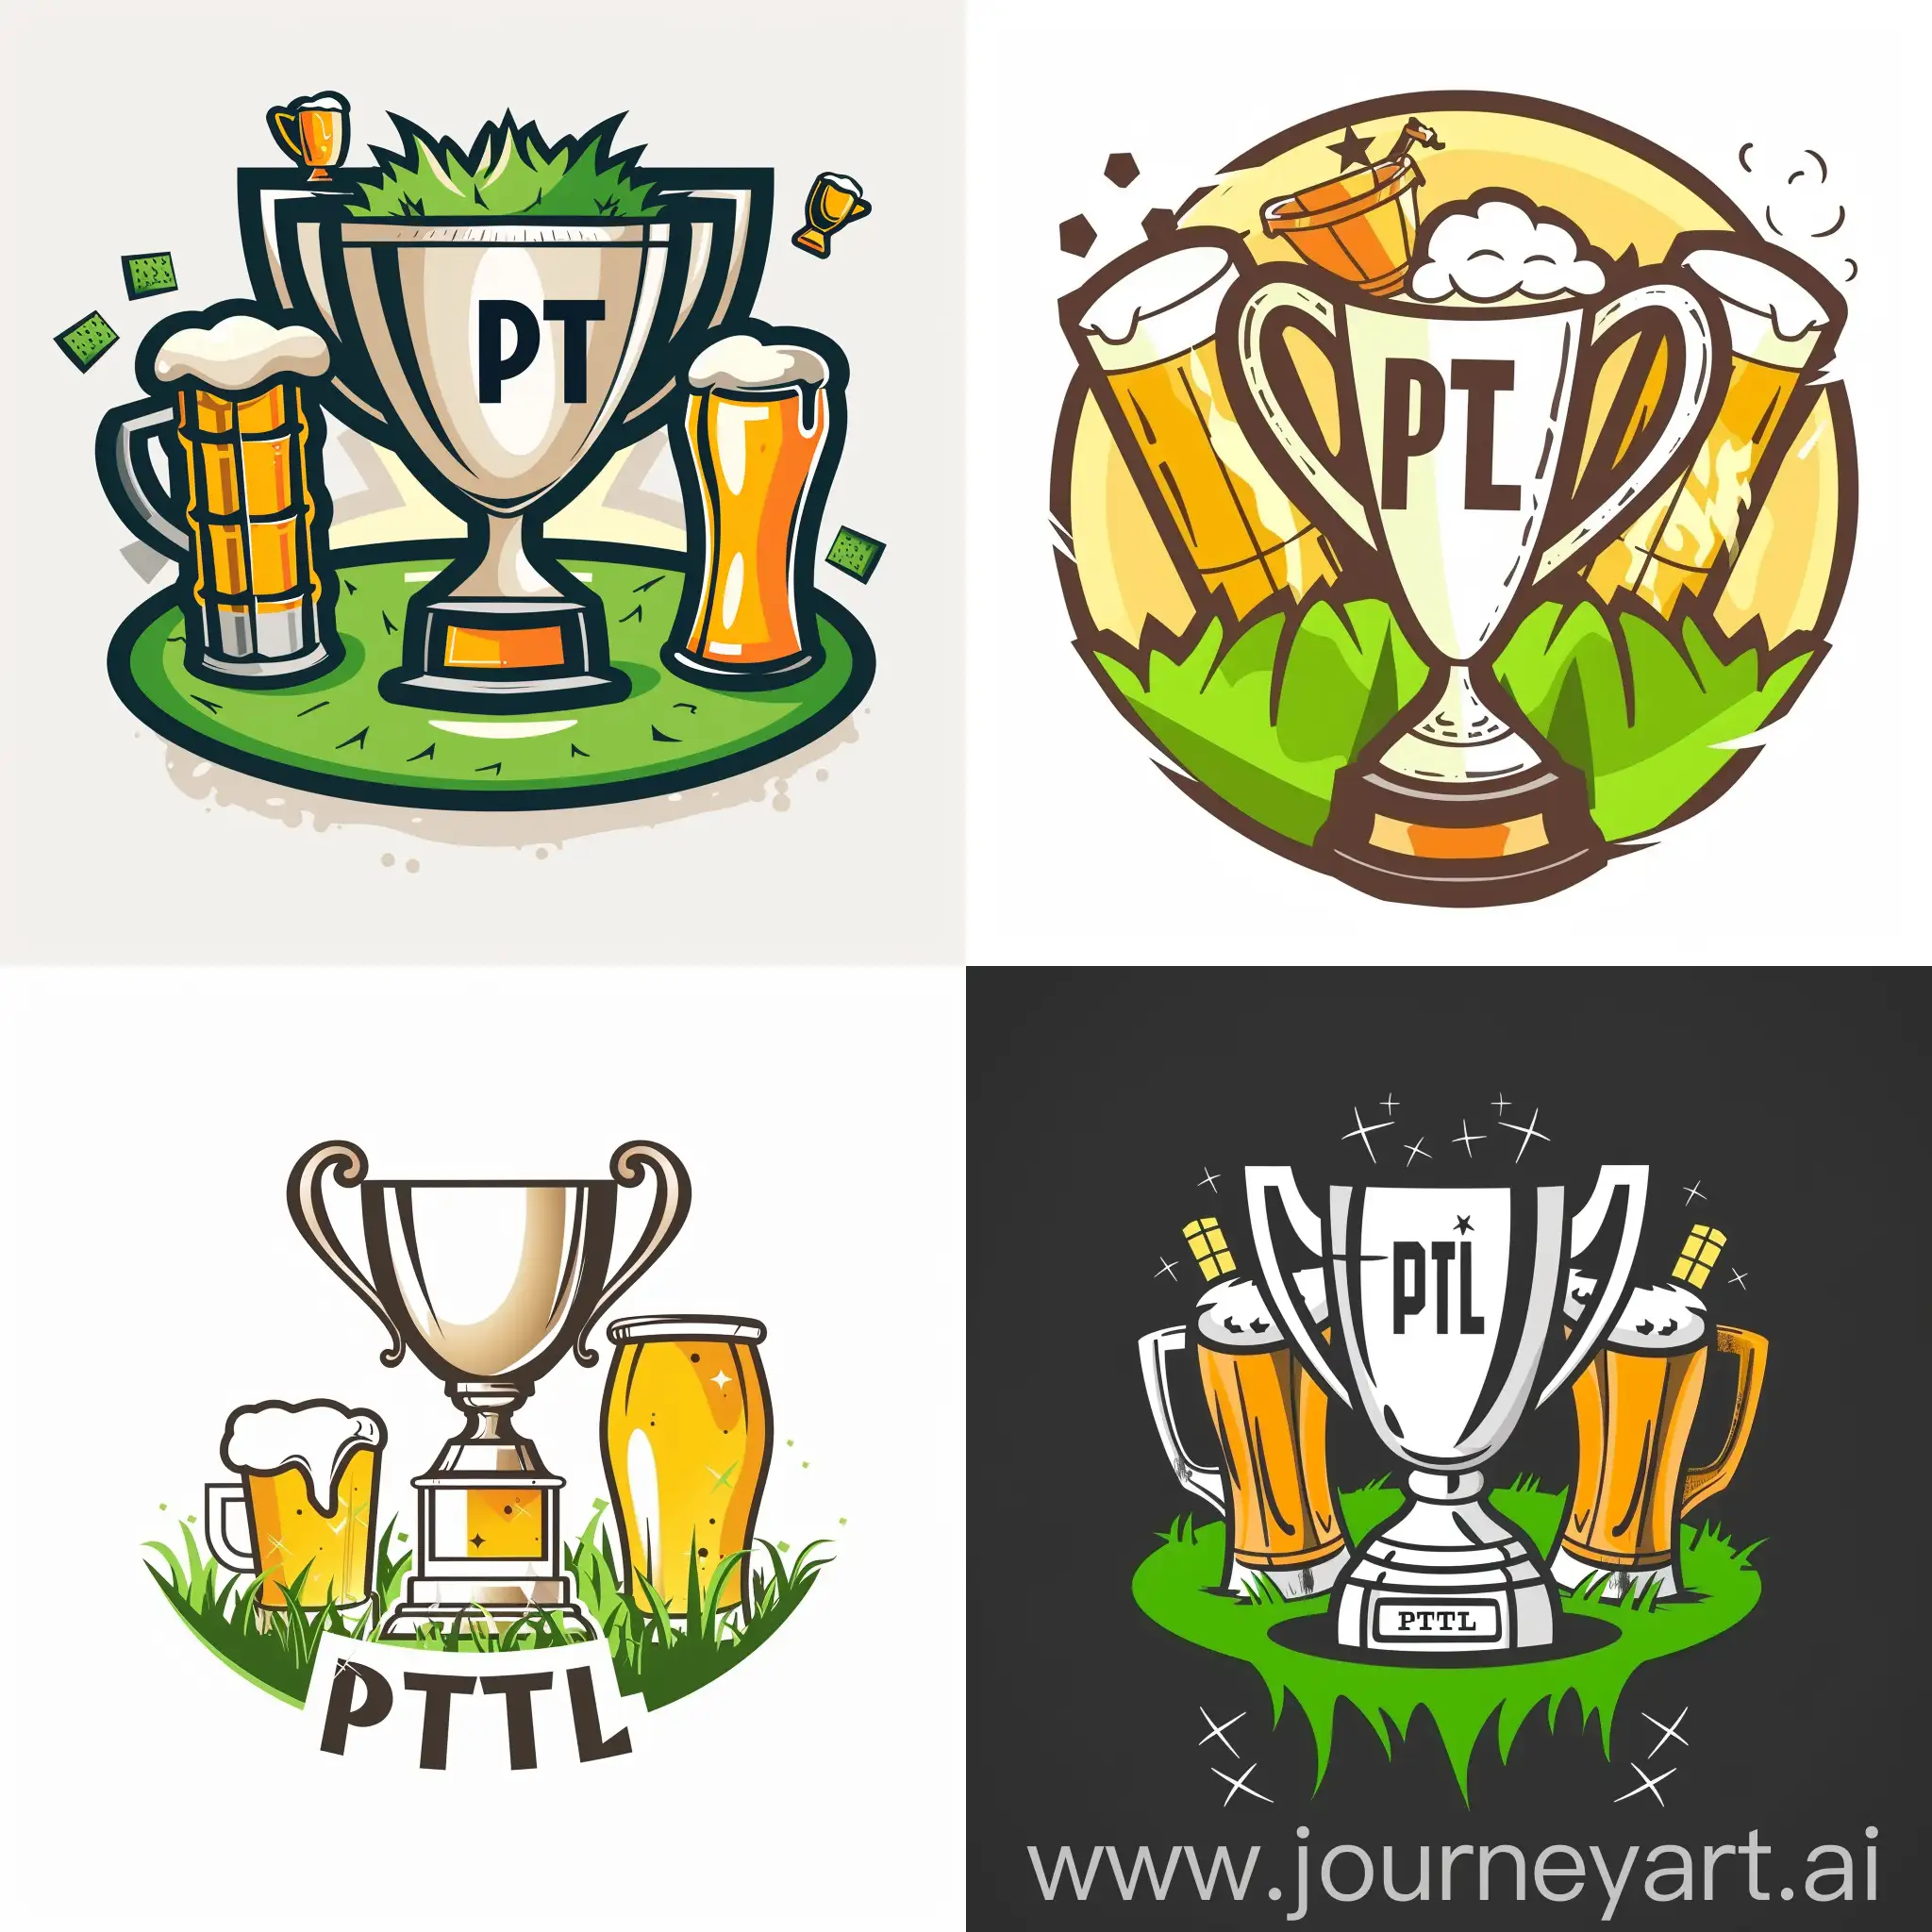 Create soccer logo, include trophy, green grass, beer. Place name of the club (PTL)in logo.